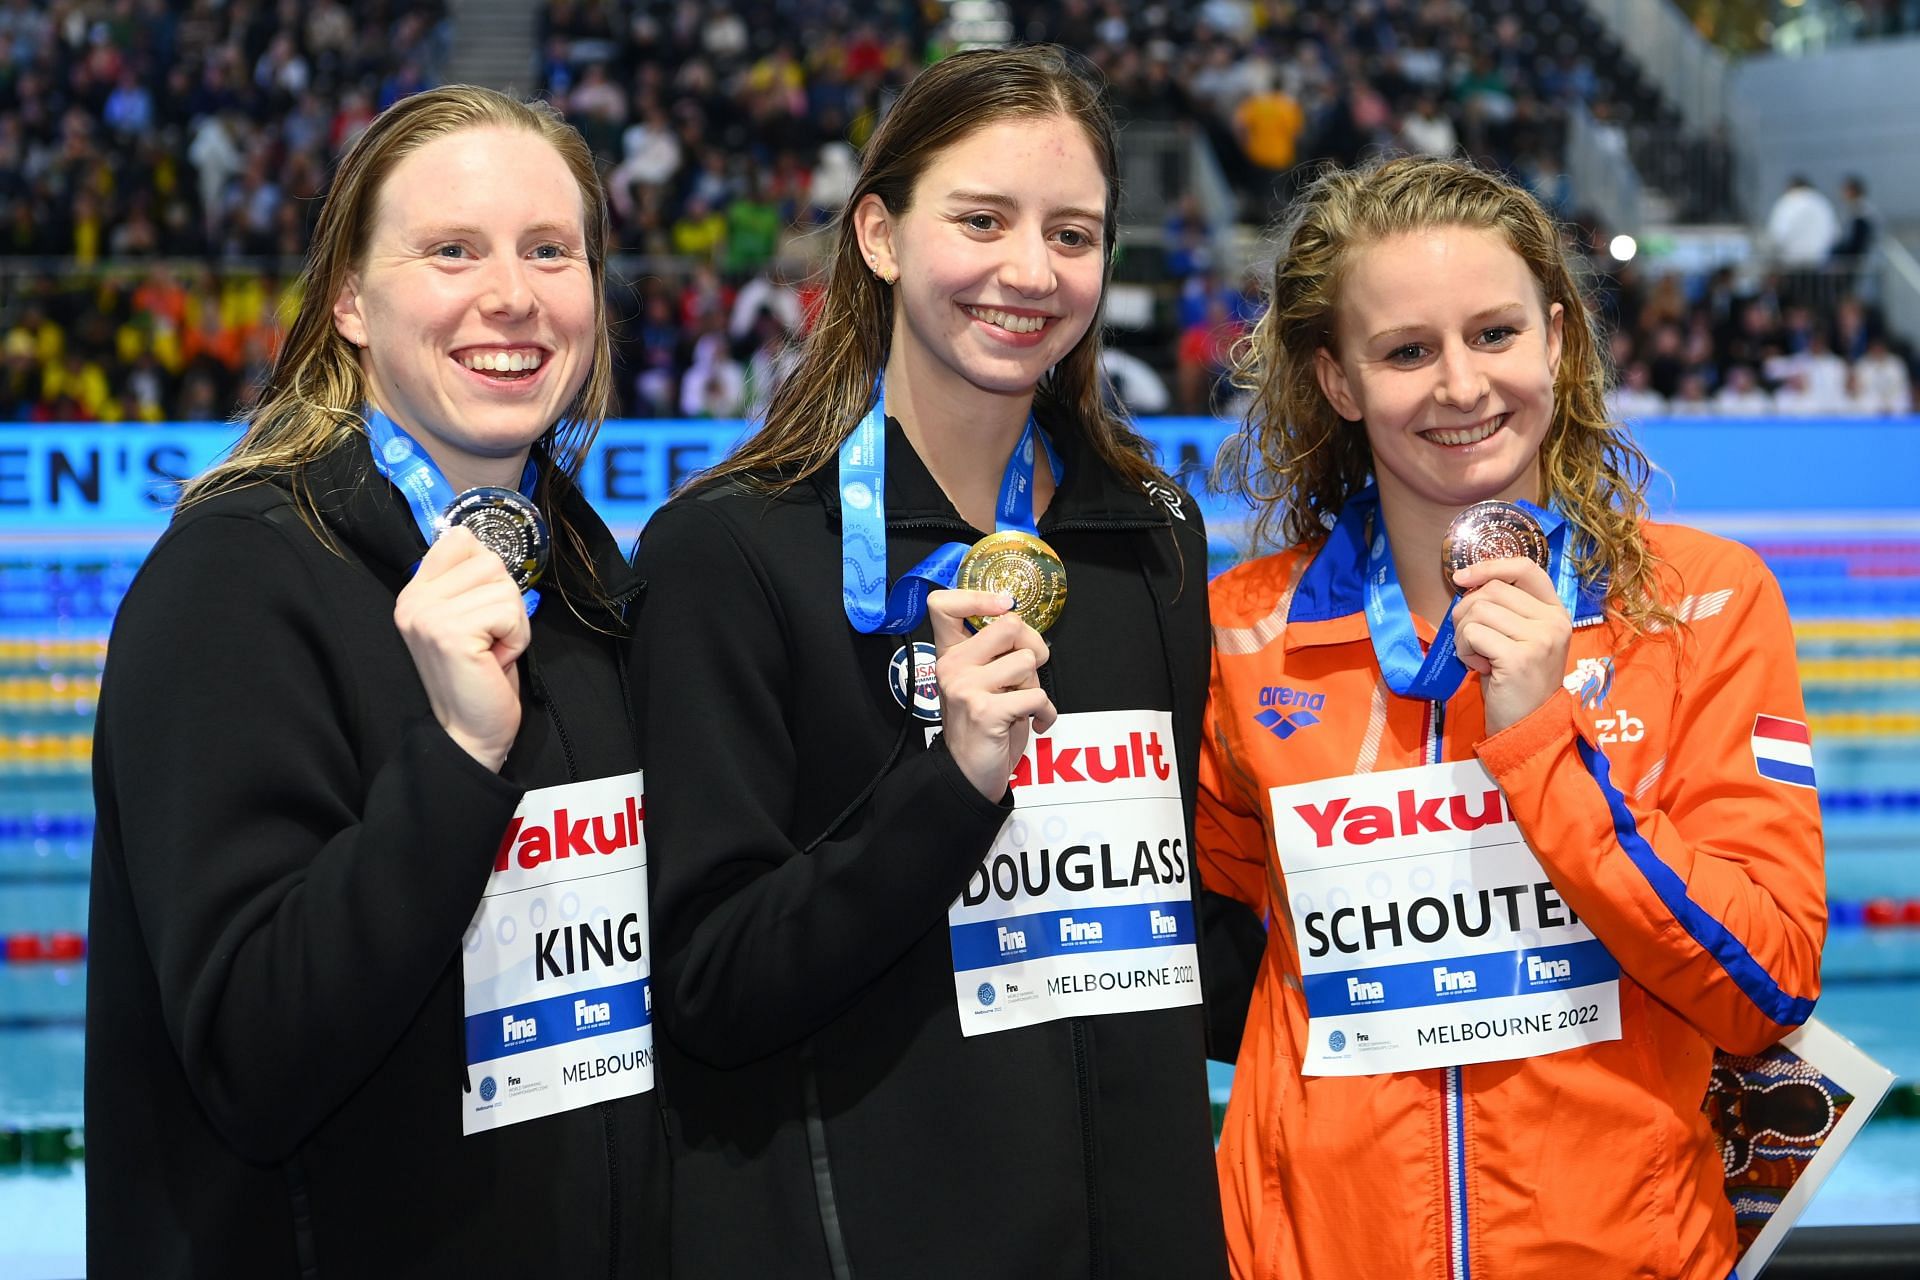 Lilly King (with Silver), Kate Douglass (with gold), and Tes Schouten (with Bronze) at the 2022 FINA World Short Course Swimming Championships